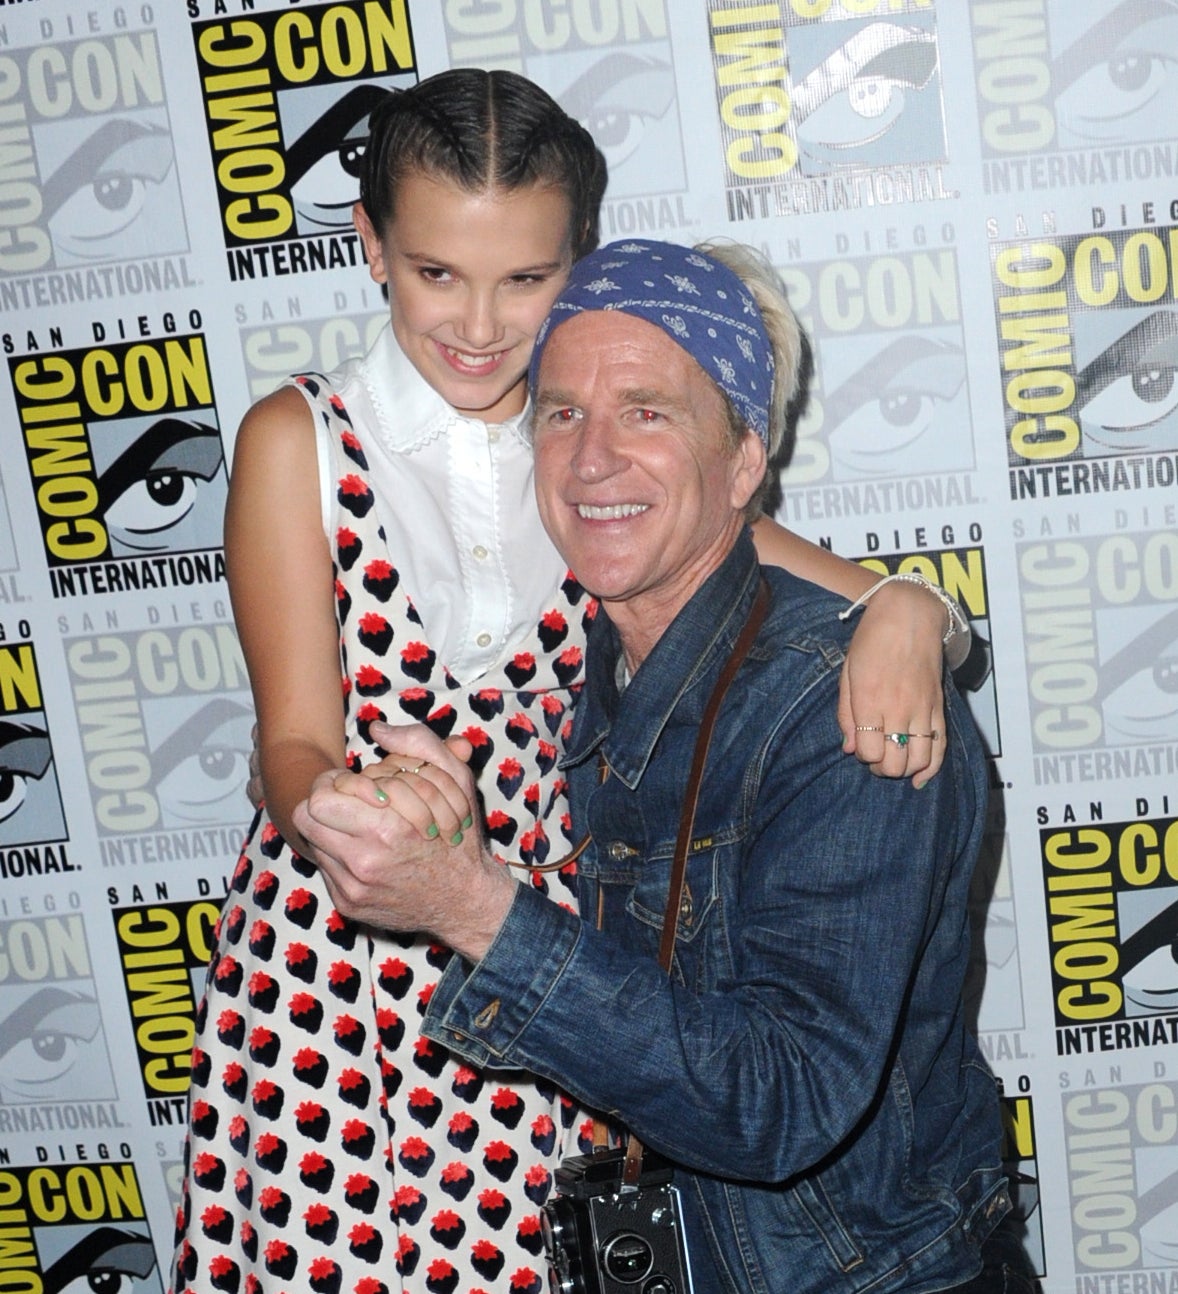 Millie Bobby Brown and Matthew Modine at Comic-Con International 2017